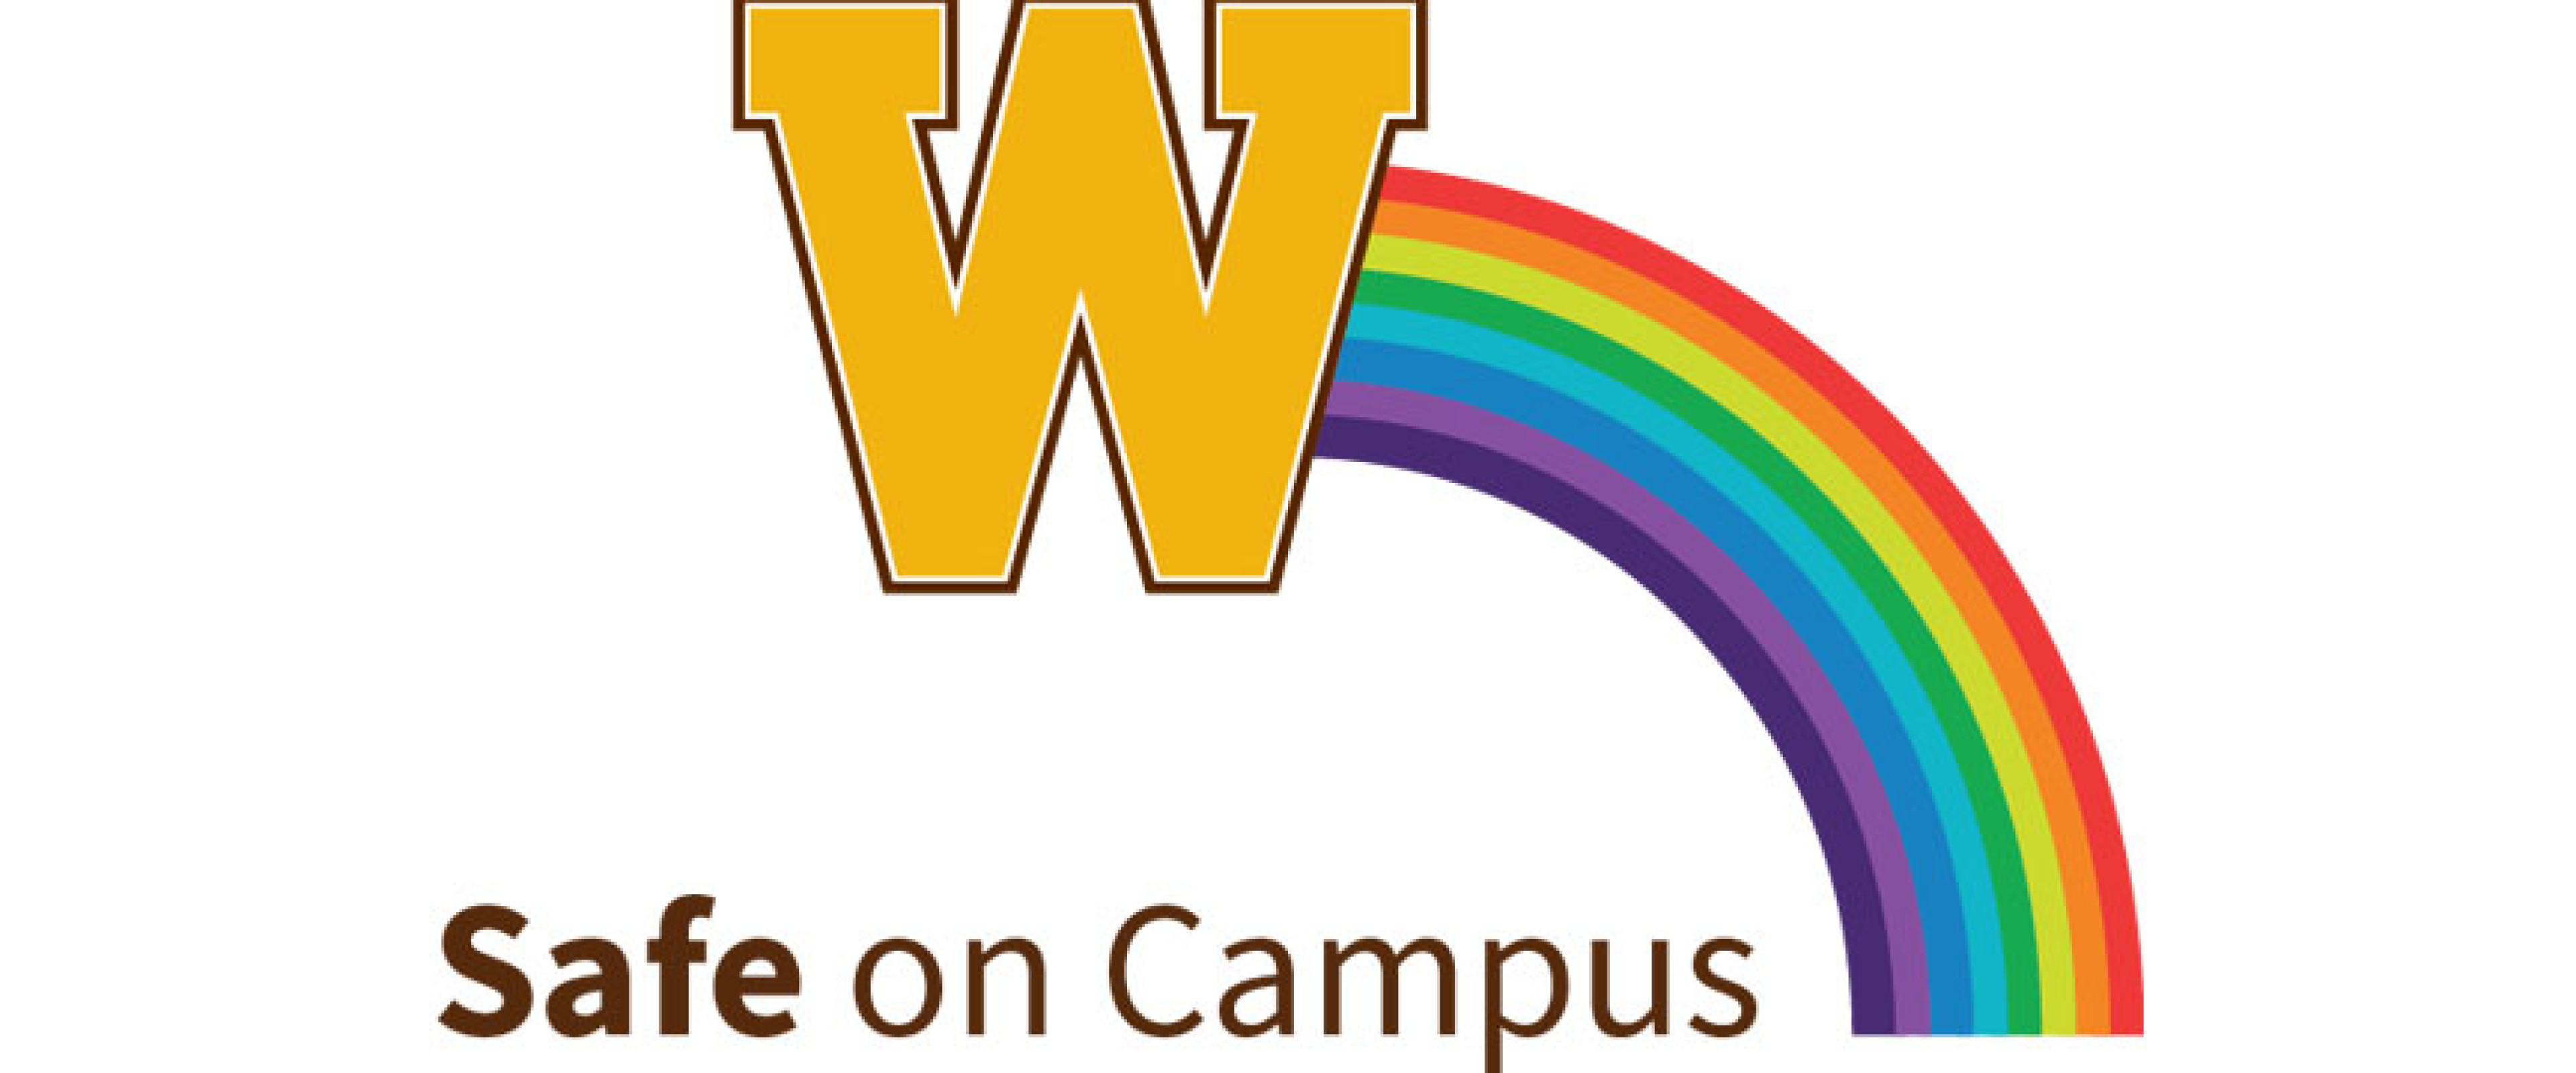 W with rainbow arch and "Safe on Campus" written below